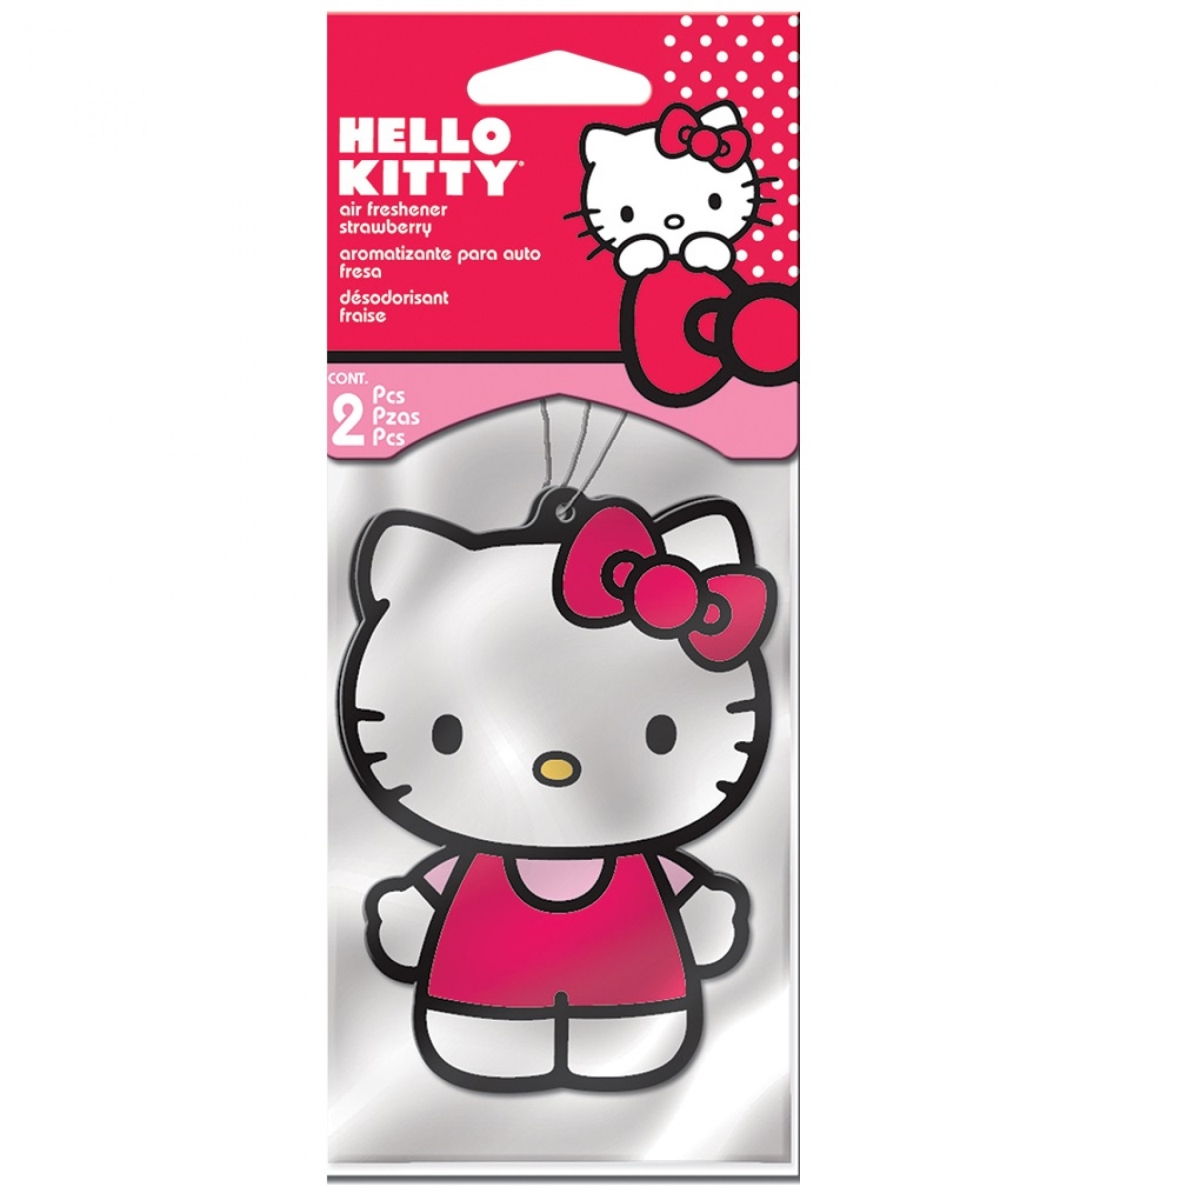 Picture of Hello Kitty 828371 Hello Kitty Strawberry Air Freshener, Pack of 2